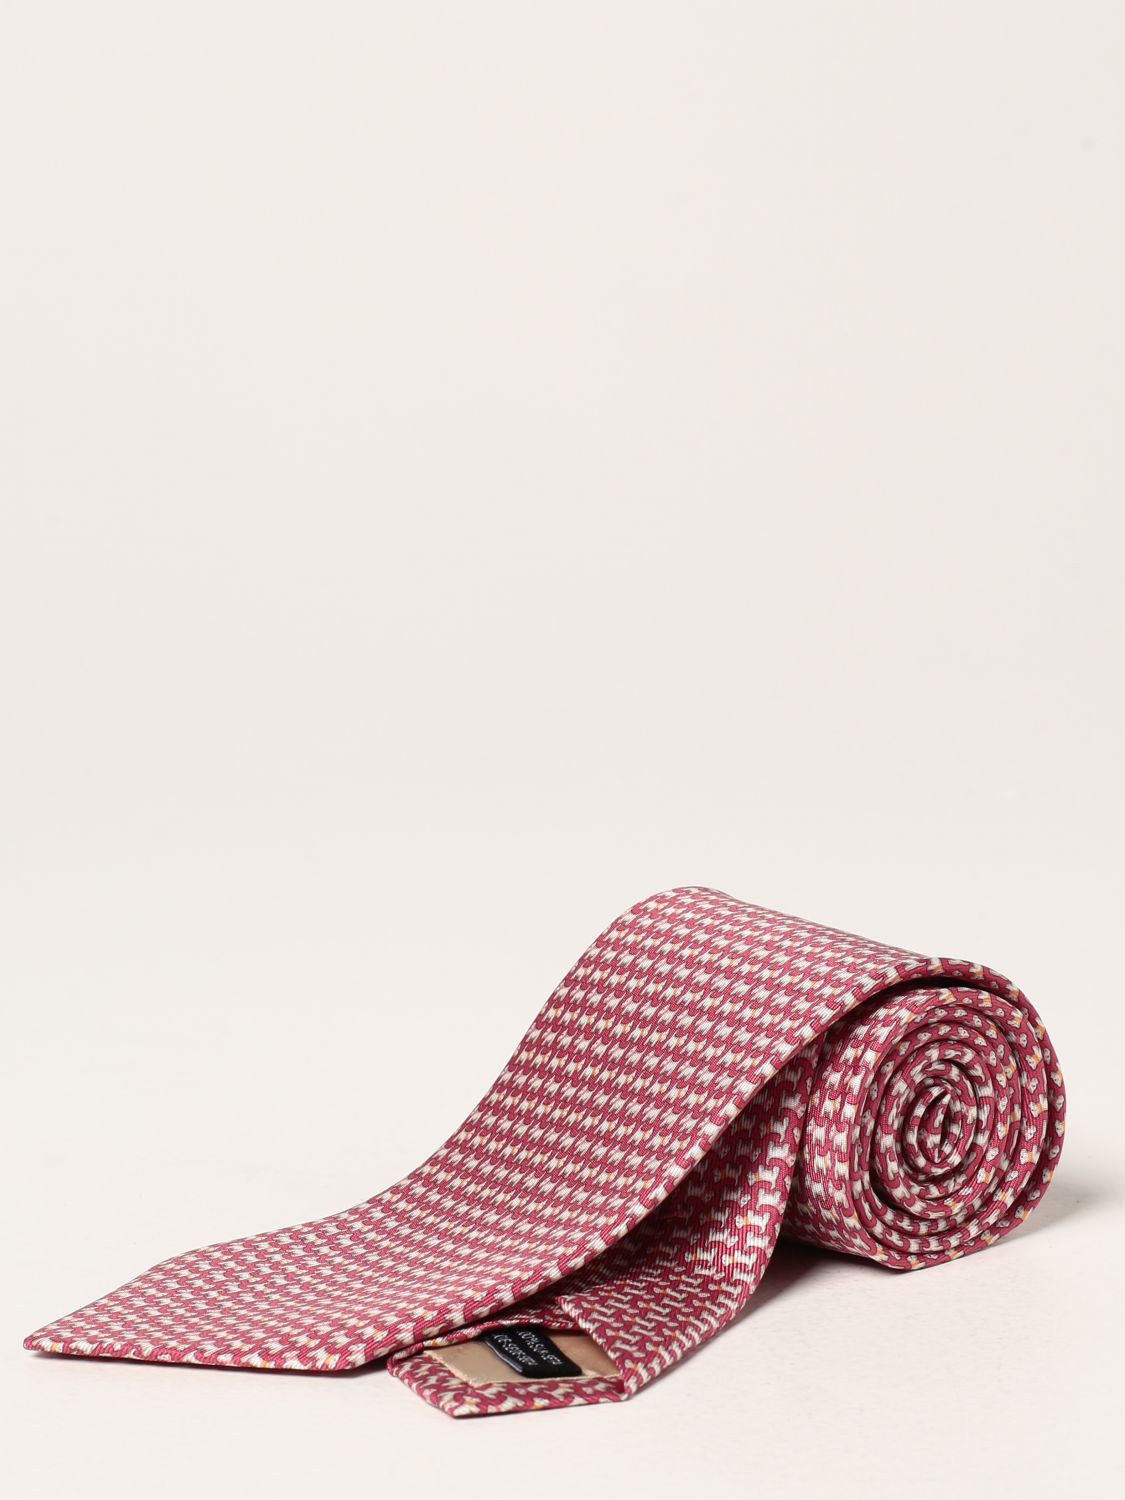 Tie Salvatore Ferragamo: Salvatore Ferragamo silk tie with micro dogs pink 1